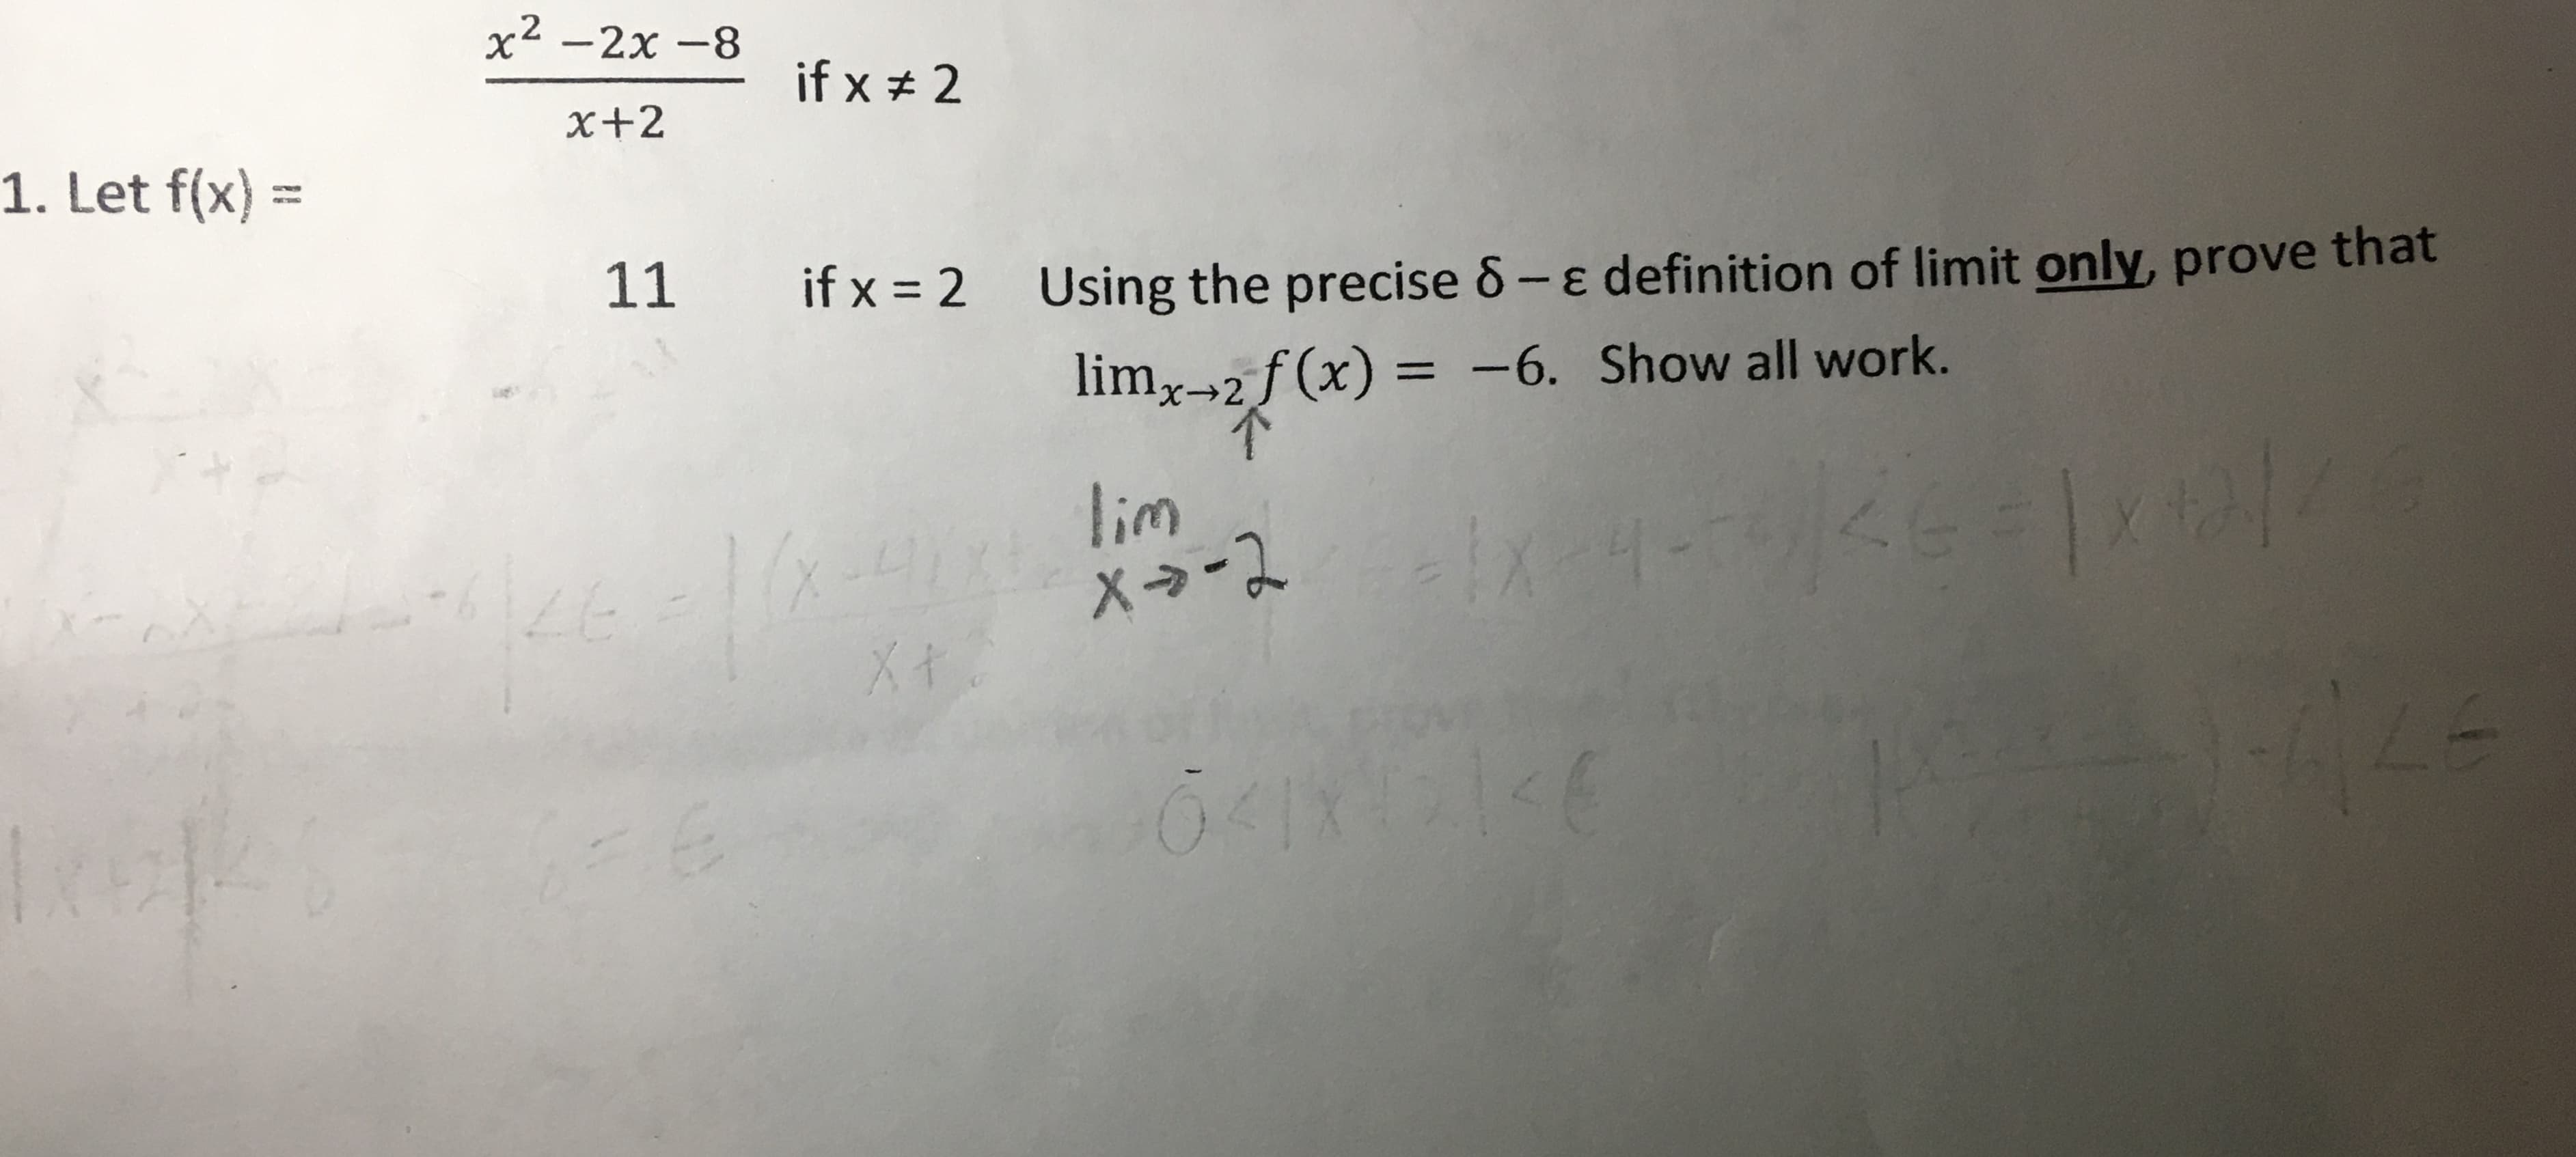 x2 -2x -8
if x # 2
x+2
1. Let f(x) =
11
if x = 2 Using the precise 8- e definition of limit only, prove that
limr-2 f (x) = -6. Show all work.
%3D
lim
X→-2
